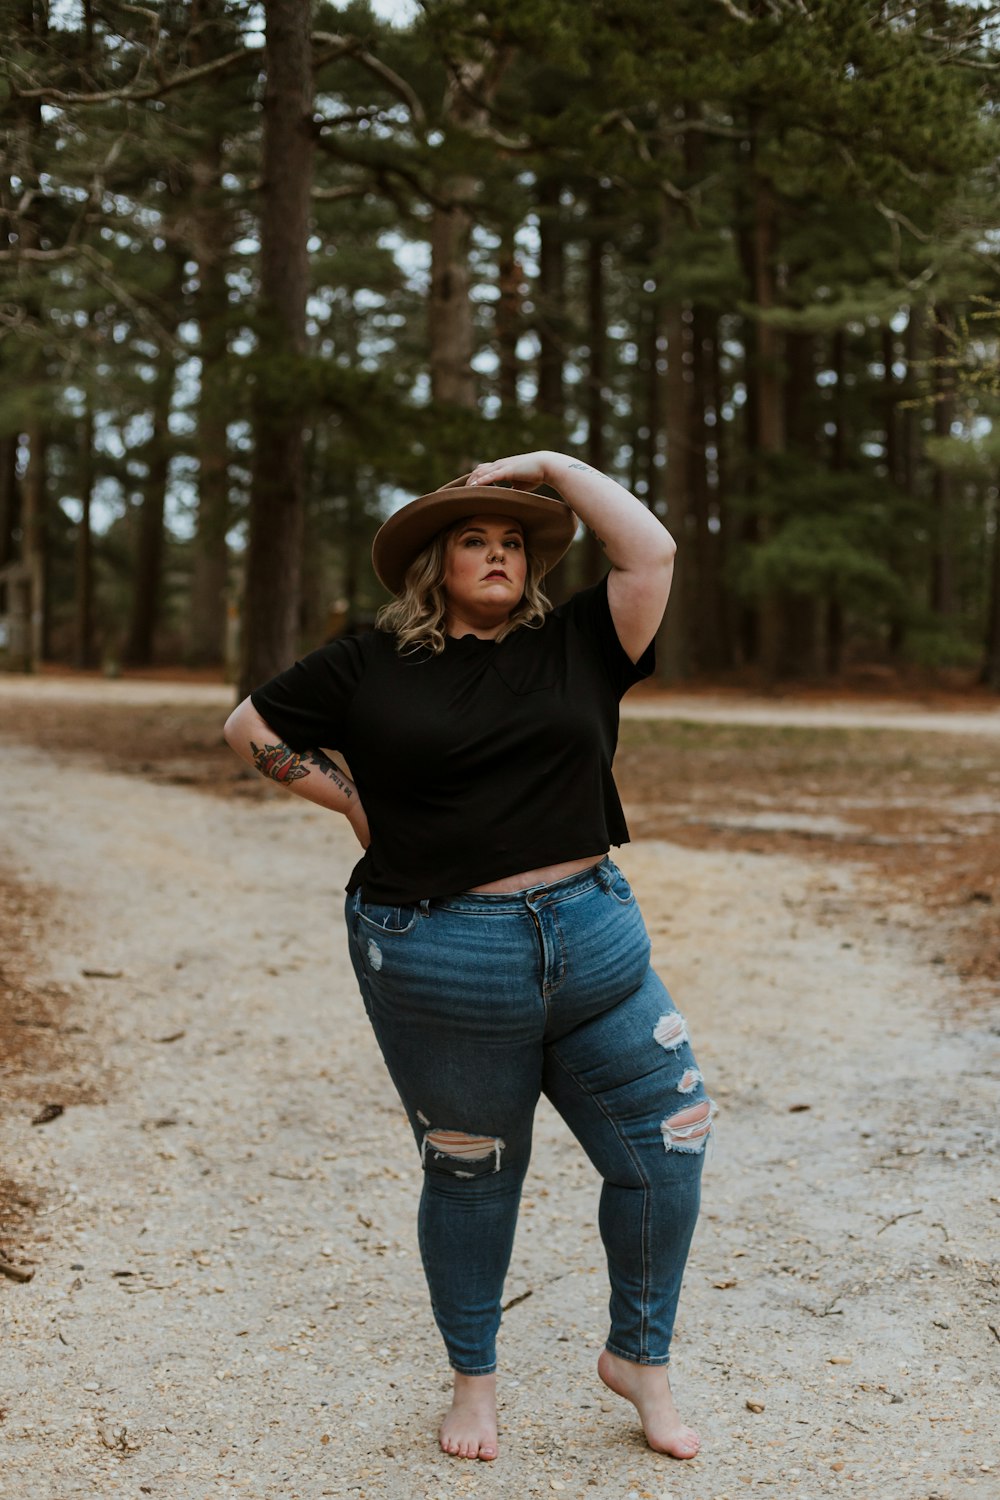 1500+ Fat Woman Pictures | Download Free Images on Unsplash